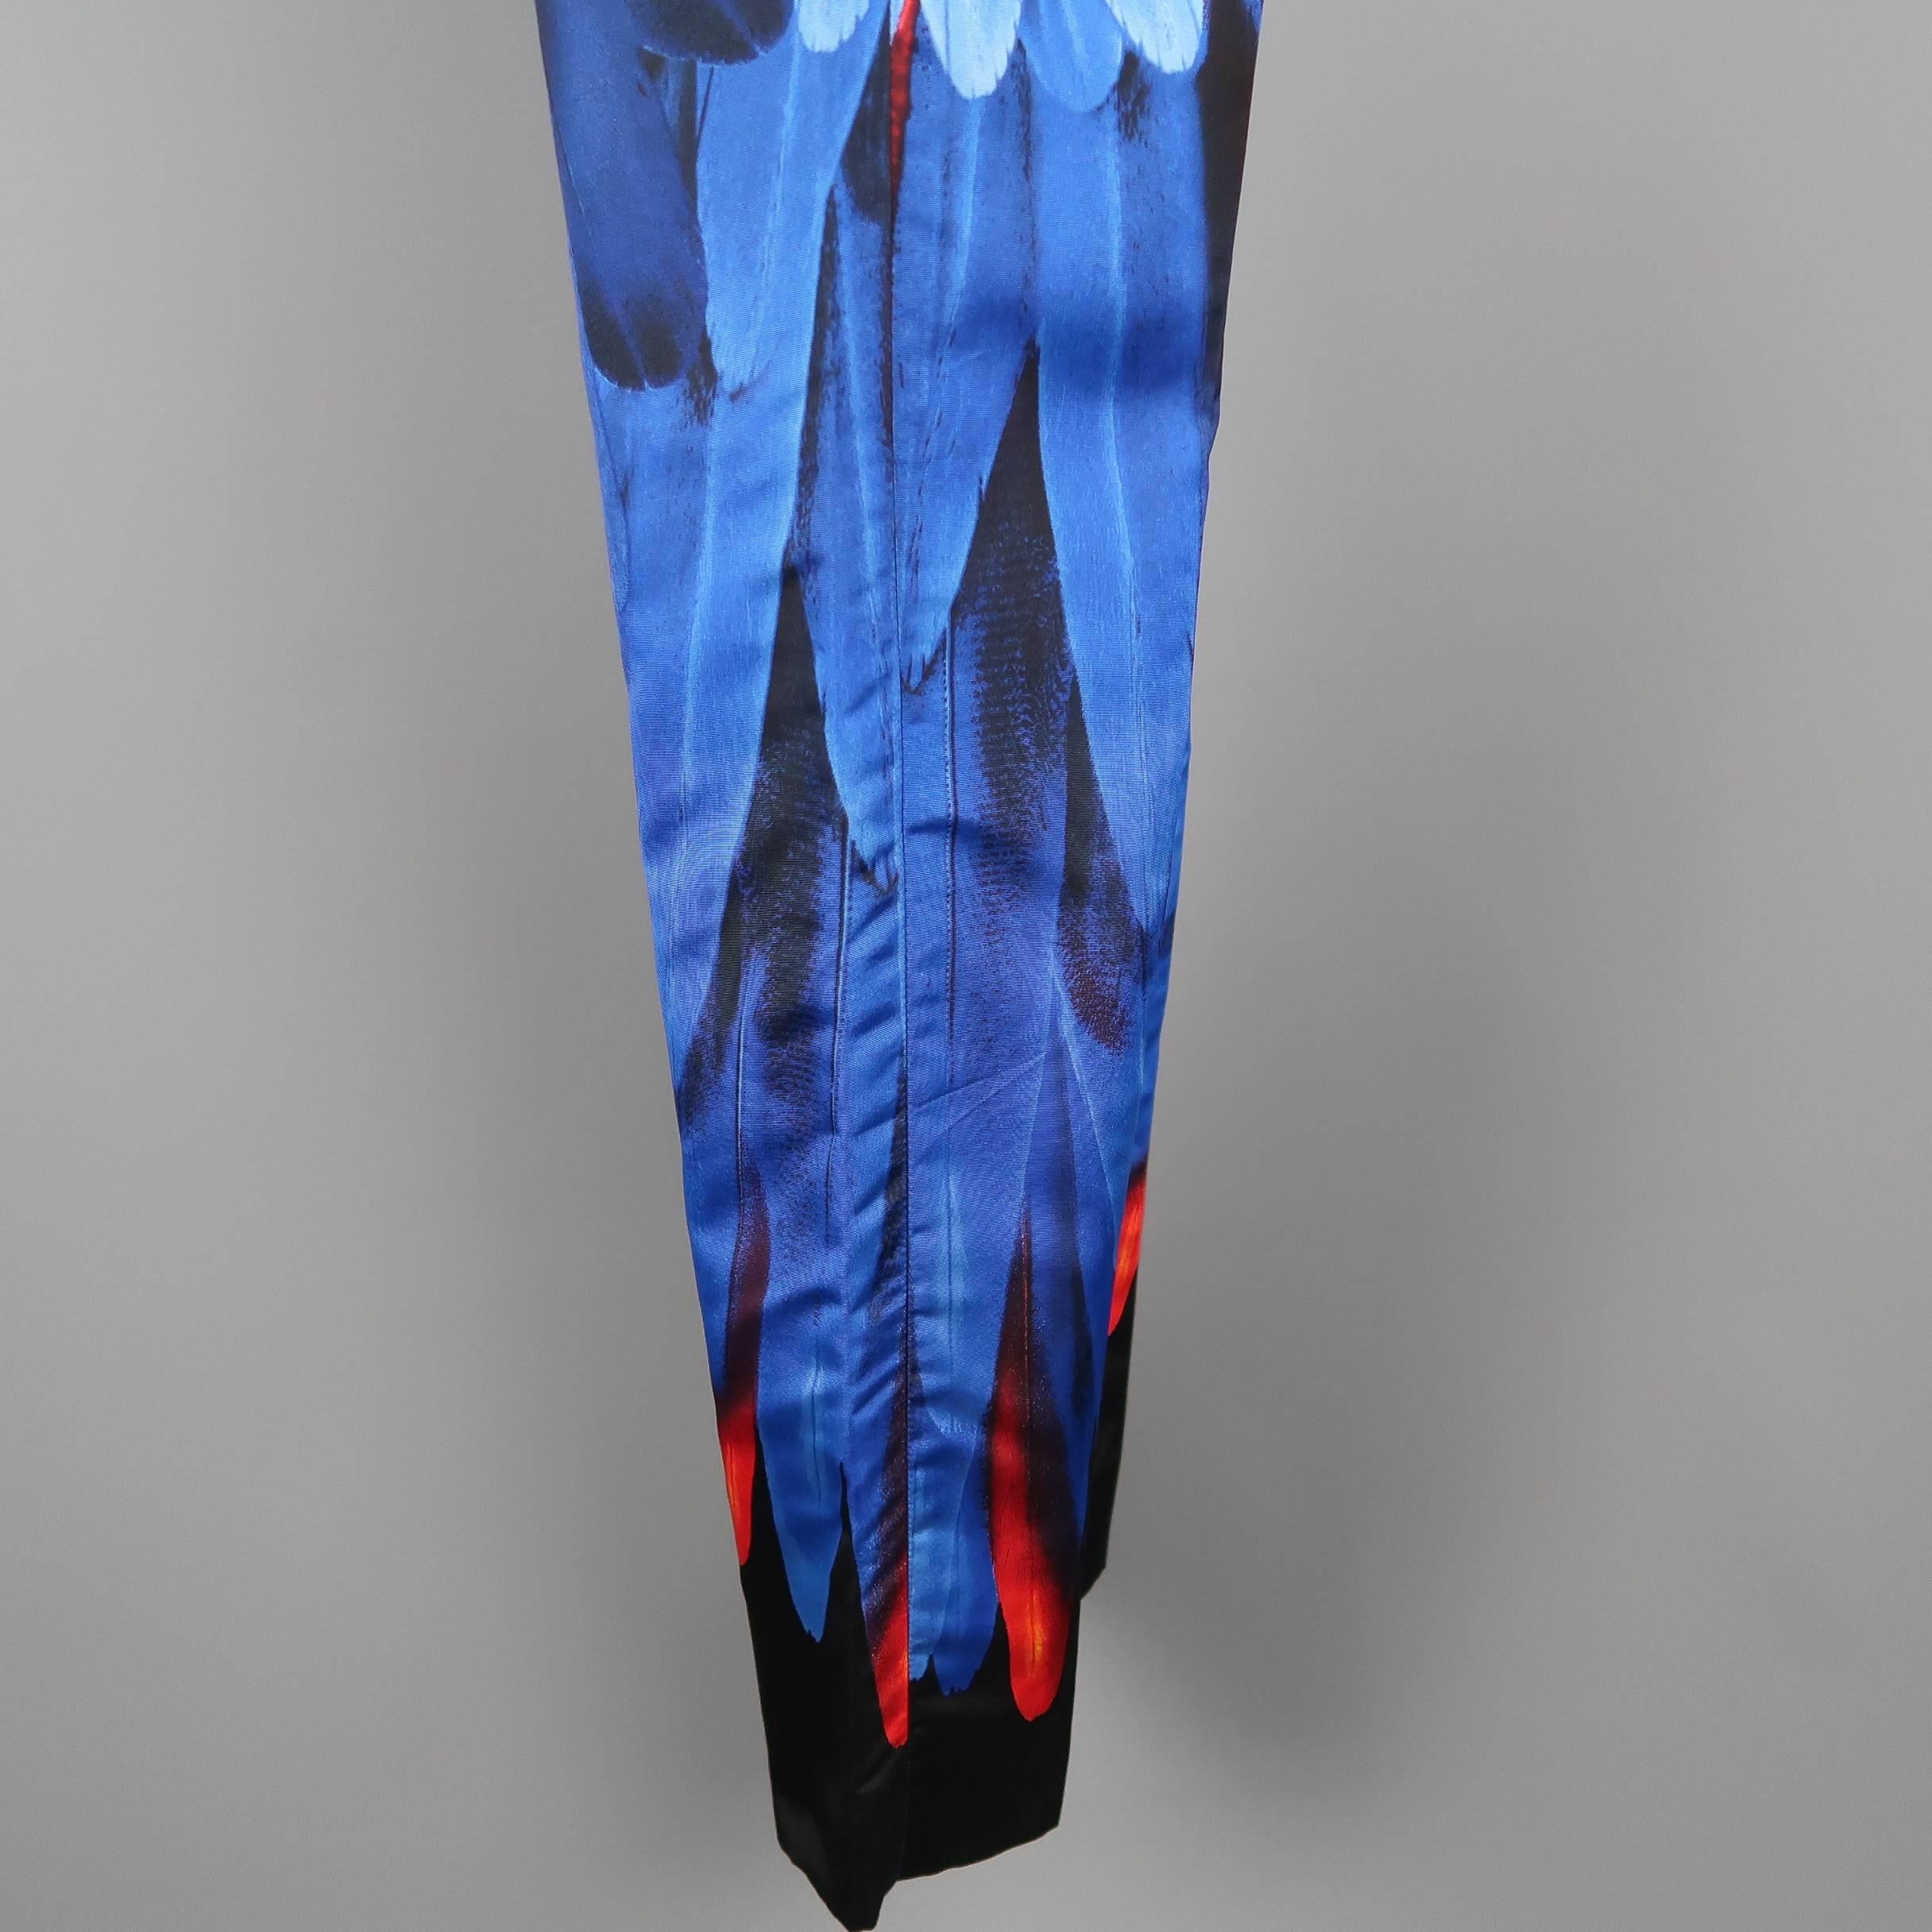 PRADA Pants - Spring 2005 Runway - Blue Red, Yellow Parrot Feather Silk Faille 1